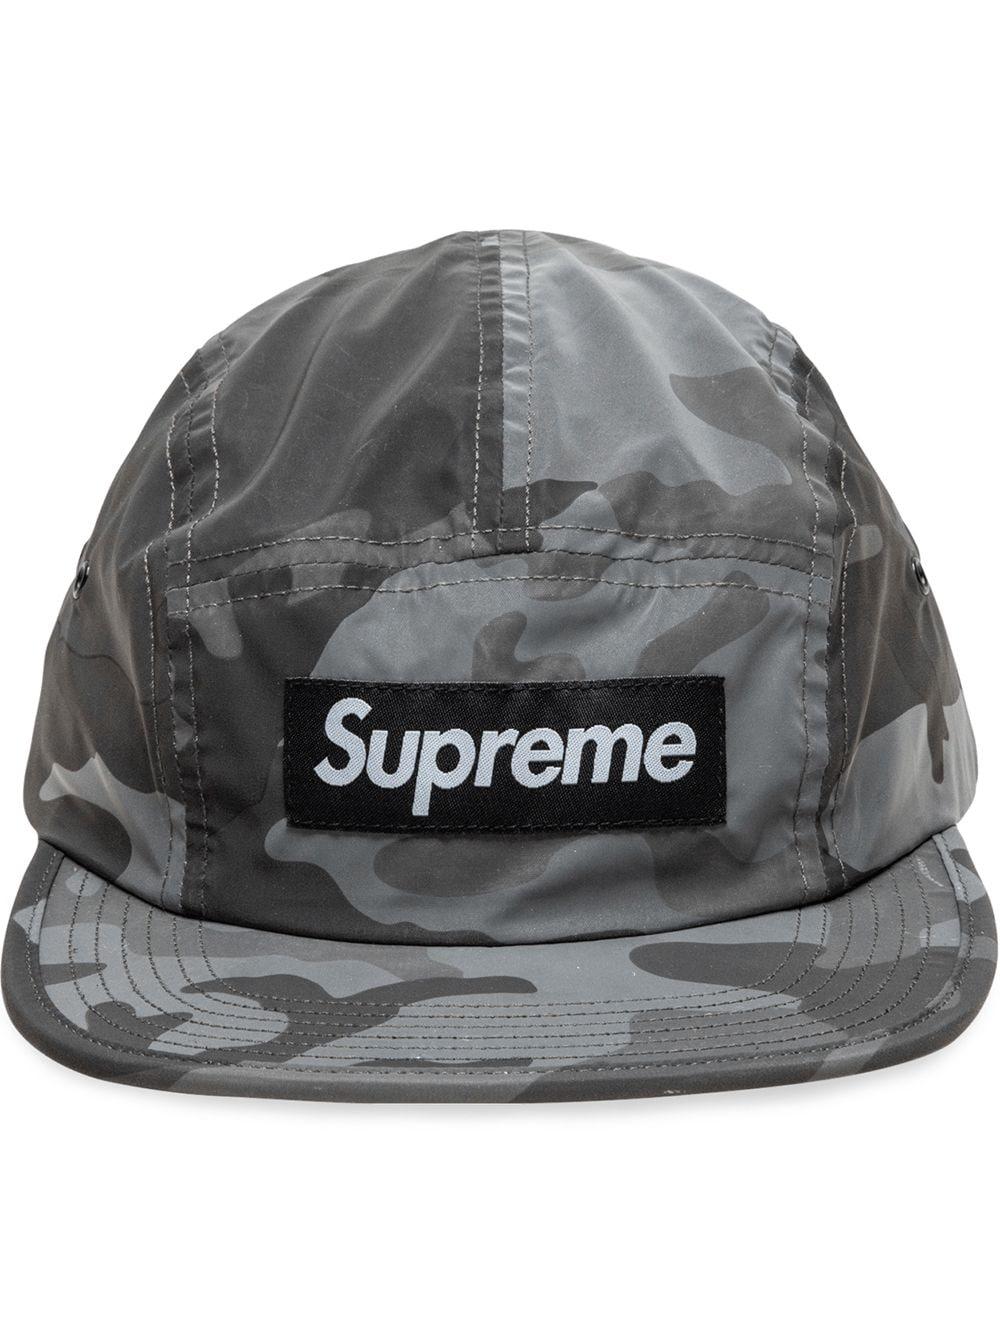 Supreme Reflective Camo Camp Cap "fw 18" in Grey (Gray) for Men - Lyst